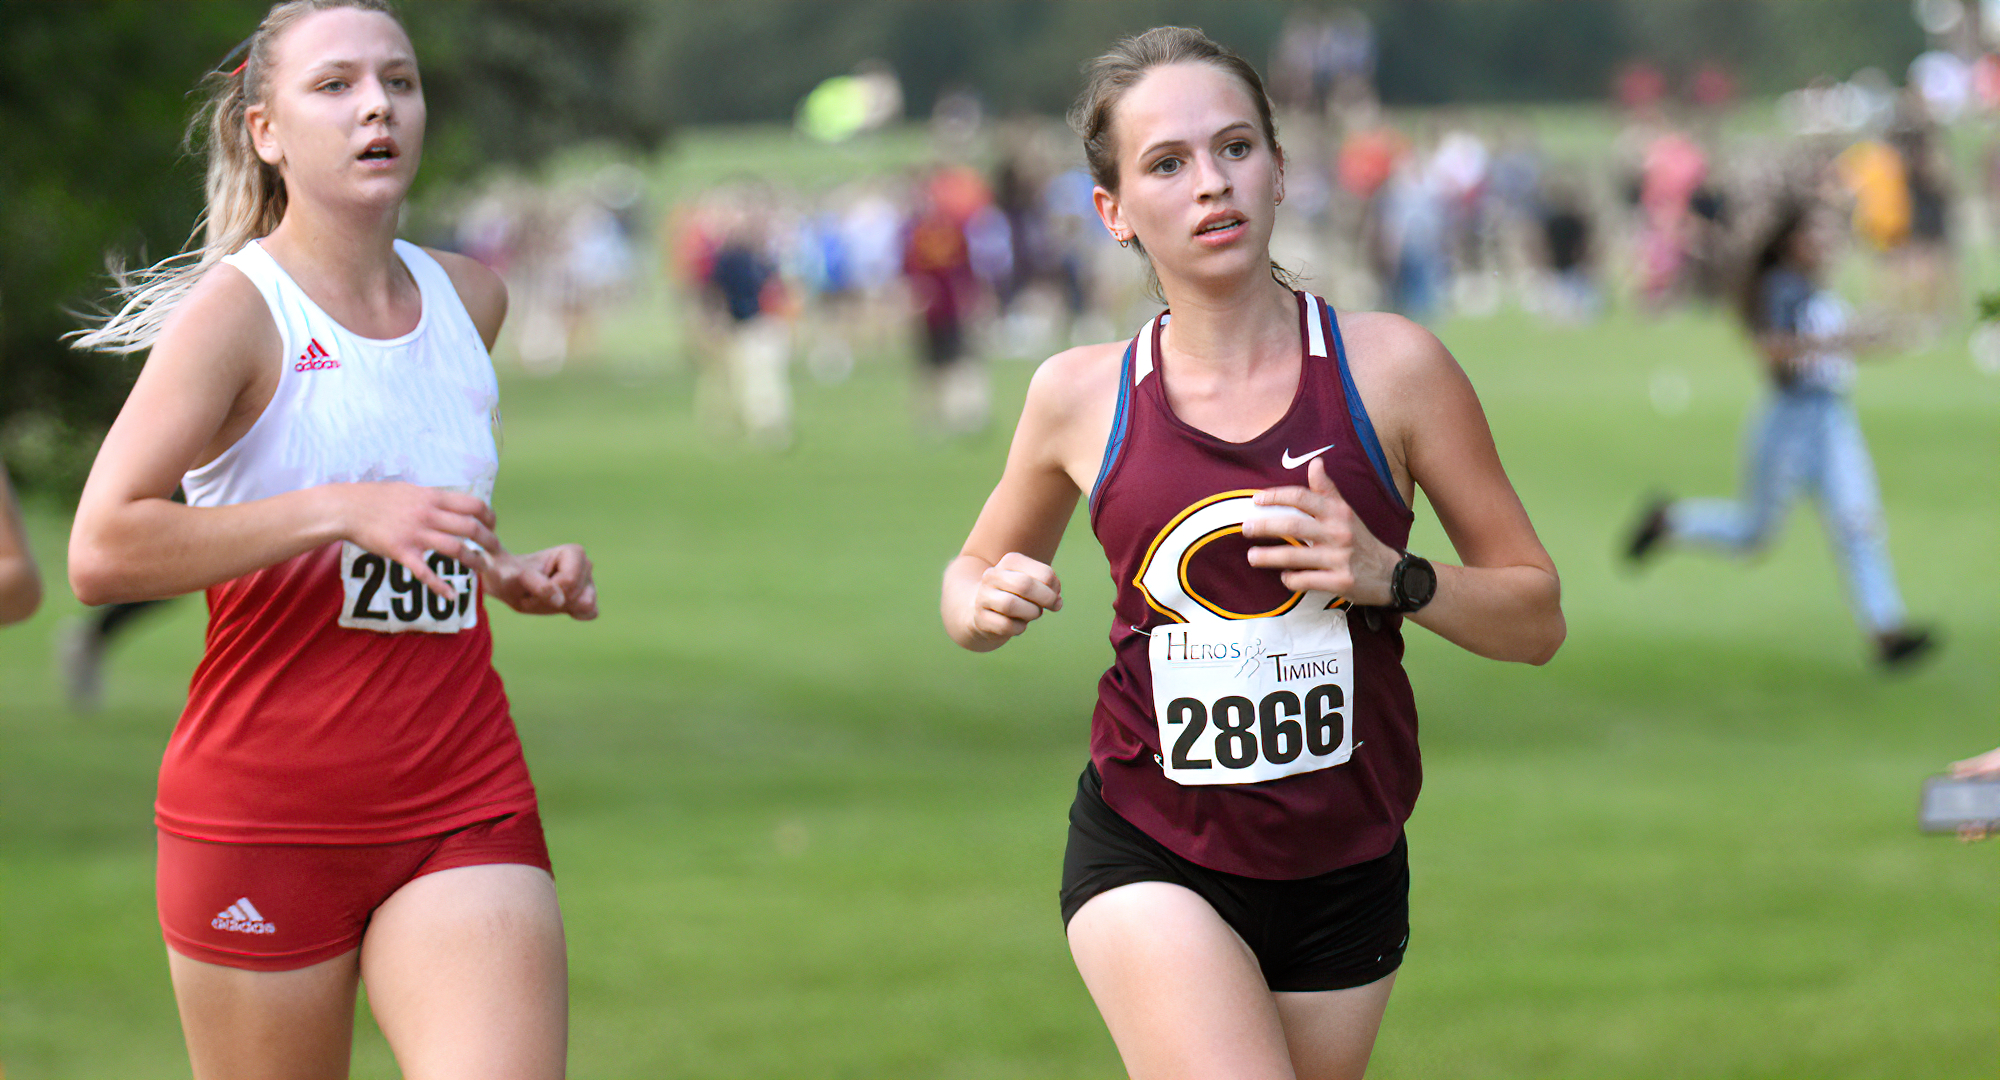 Kaitlyn Rooney posted the biggest improvement at the Carleton Invite. She bettered her 2019 marks by over 100 places and three minutes.